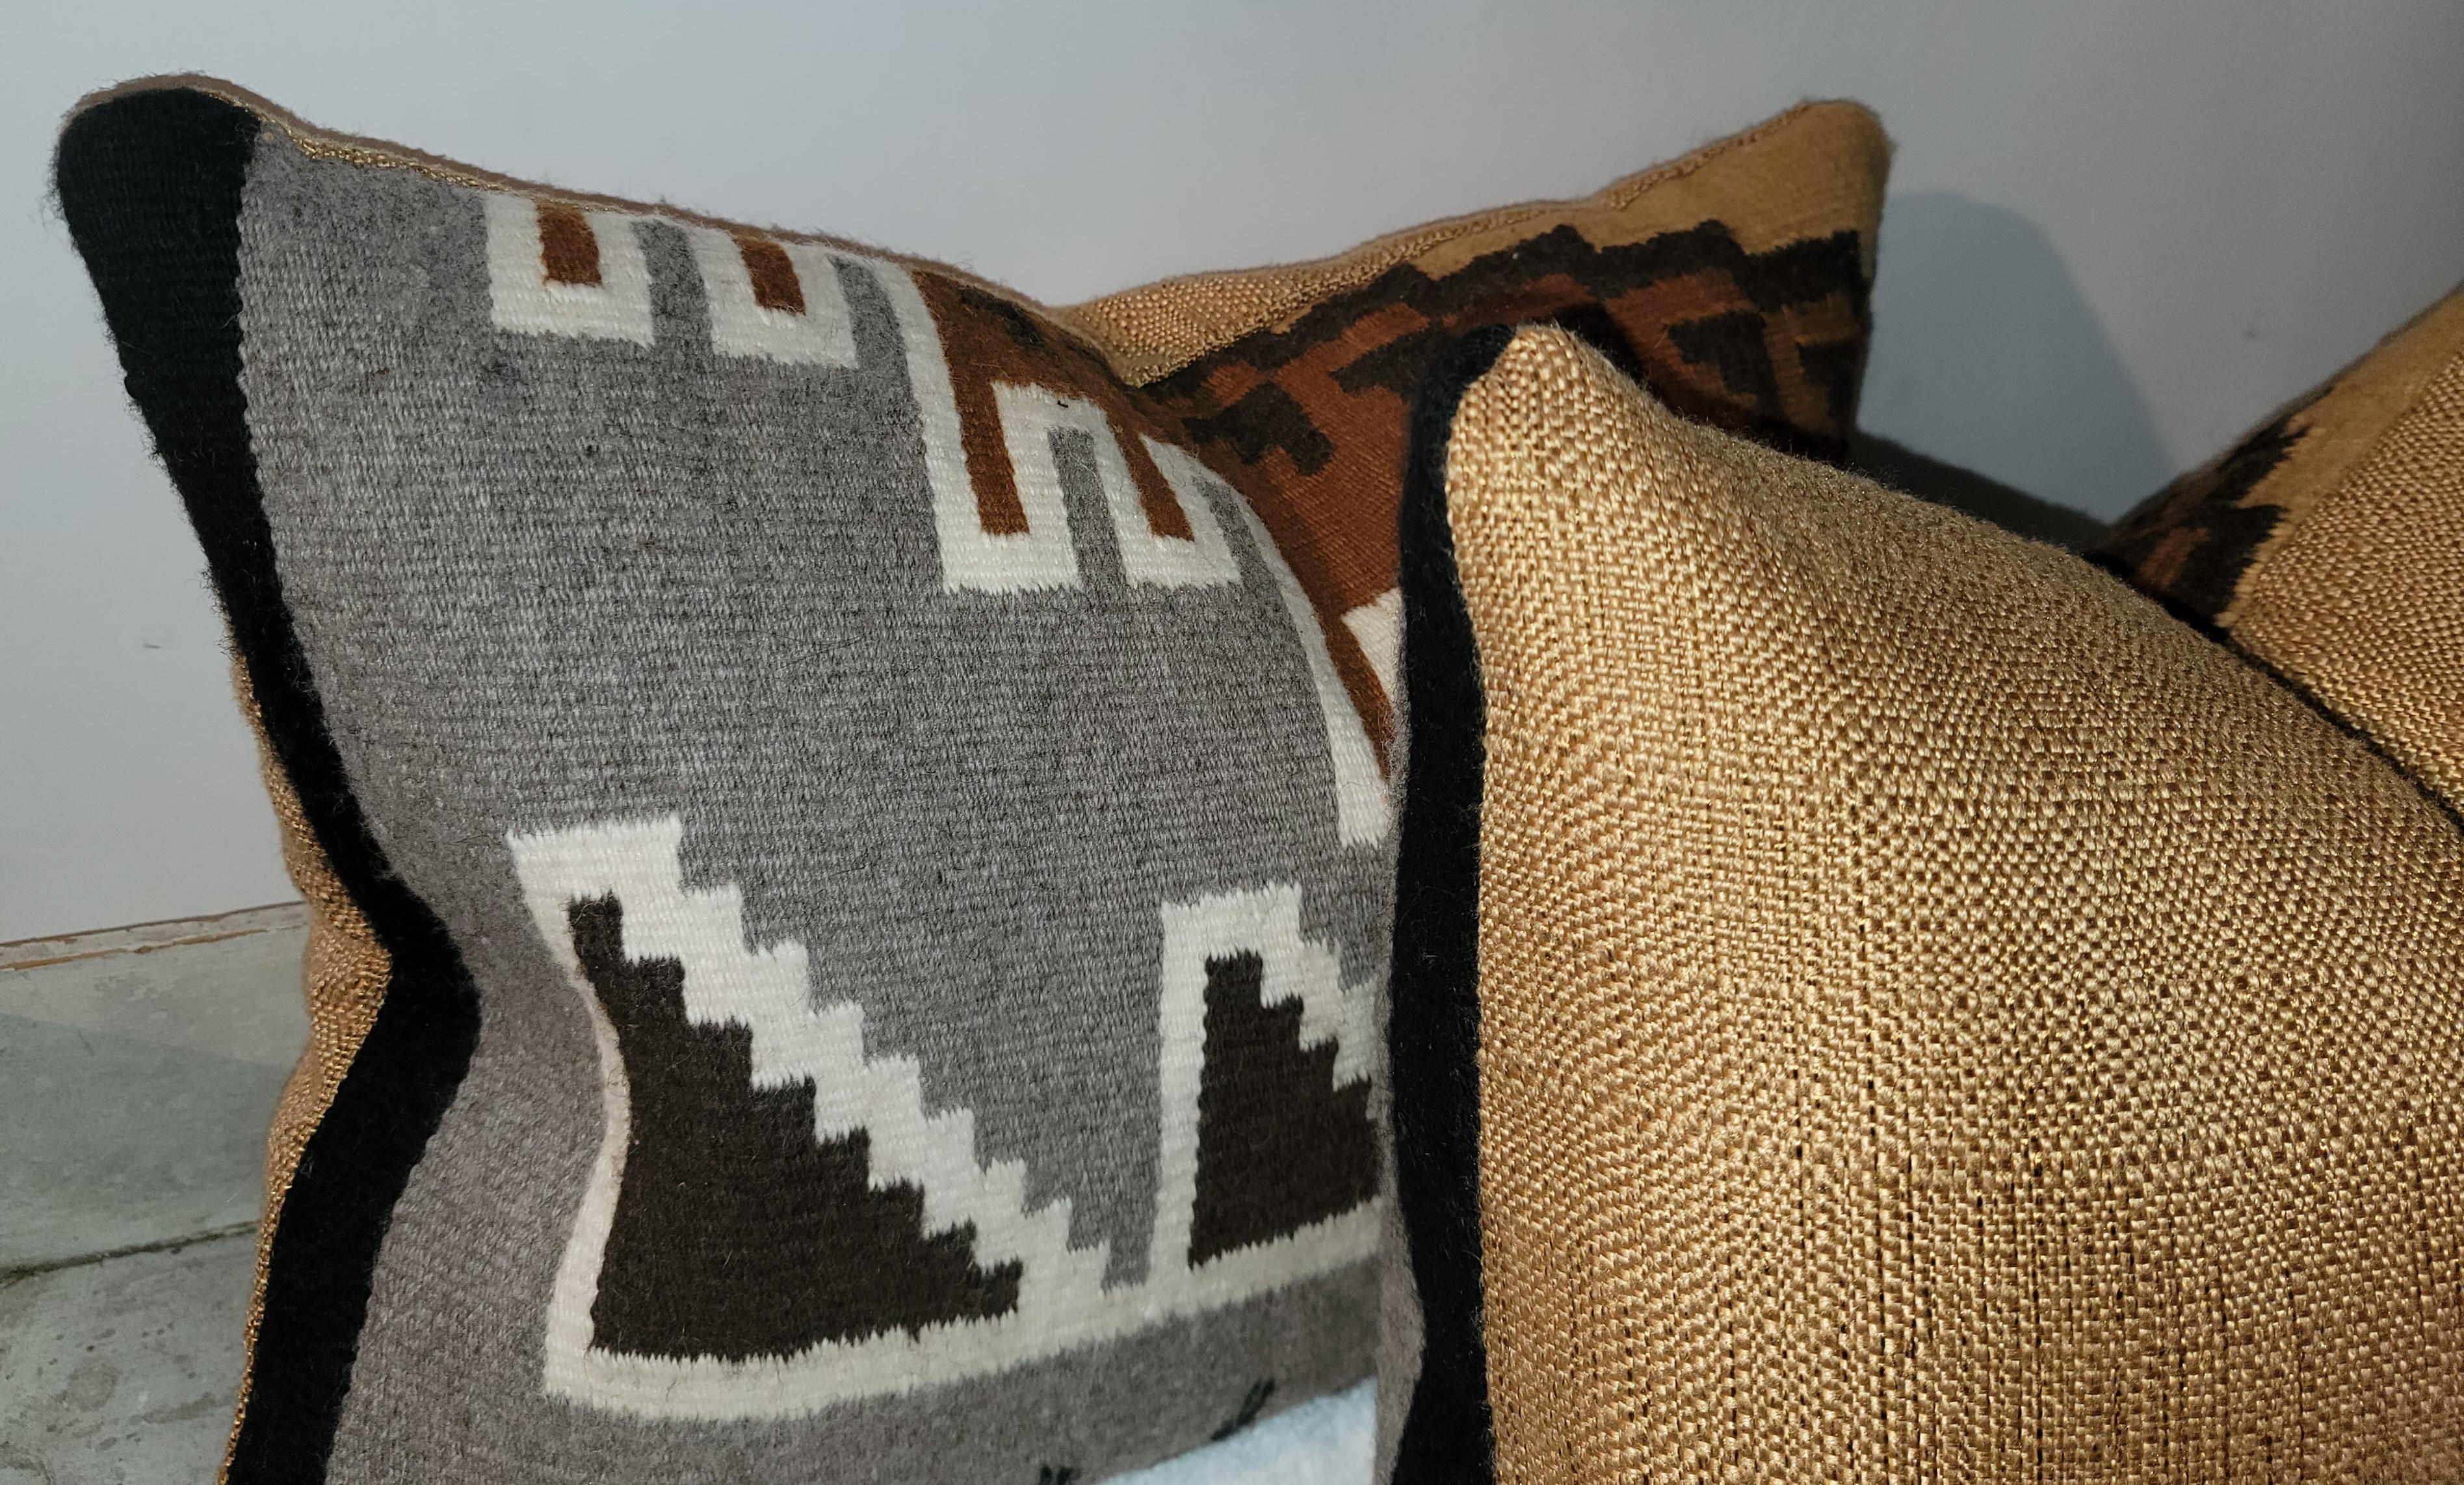 Pair of Navajo Indian weaving pillows. Feather and down inserts and zipped casing.